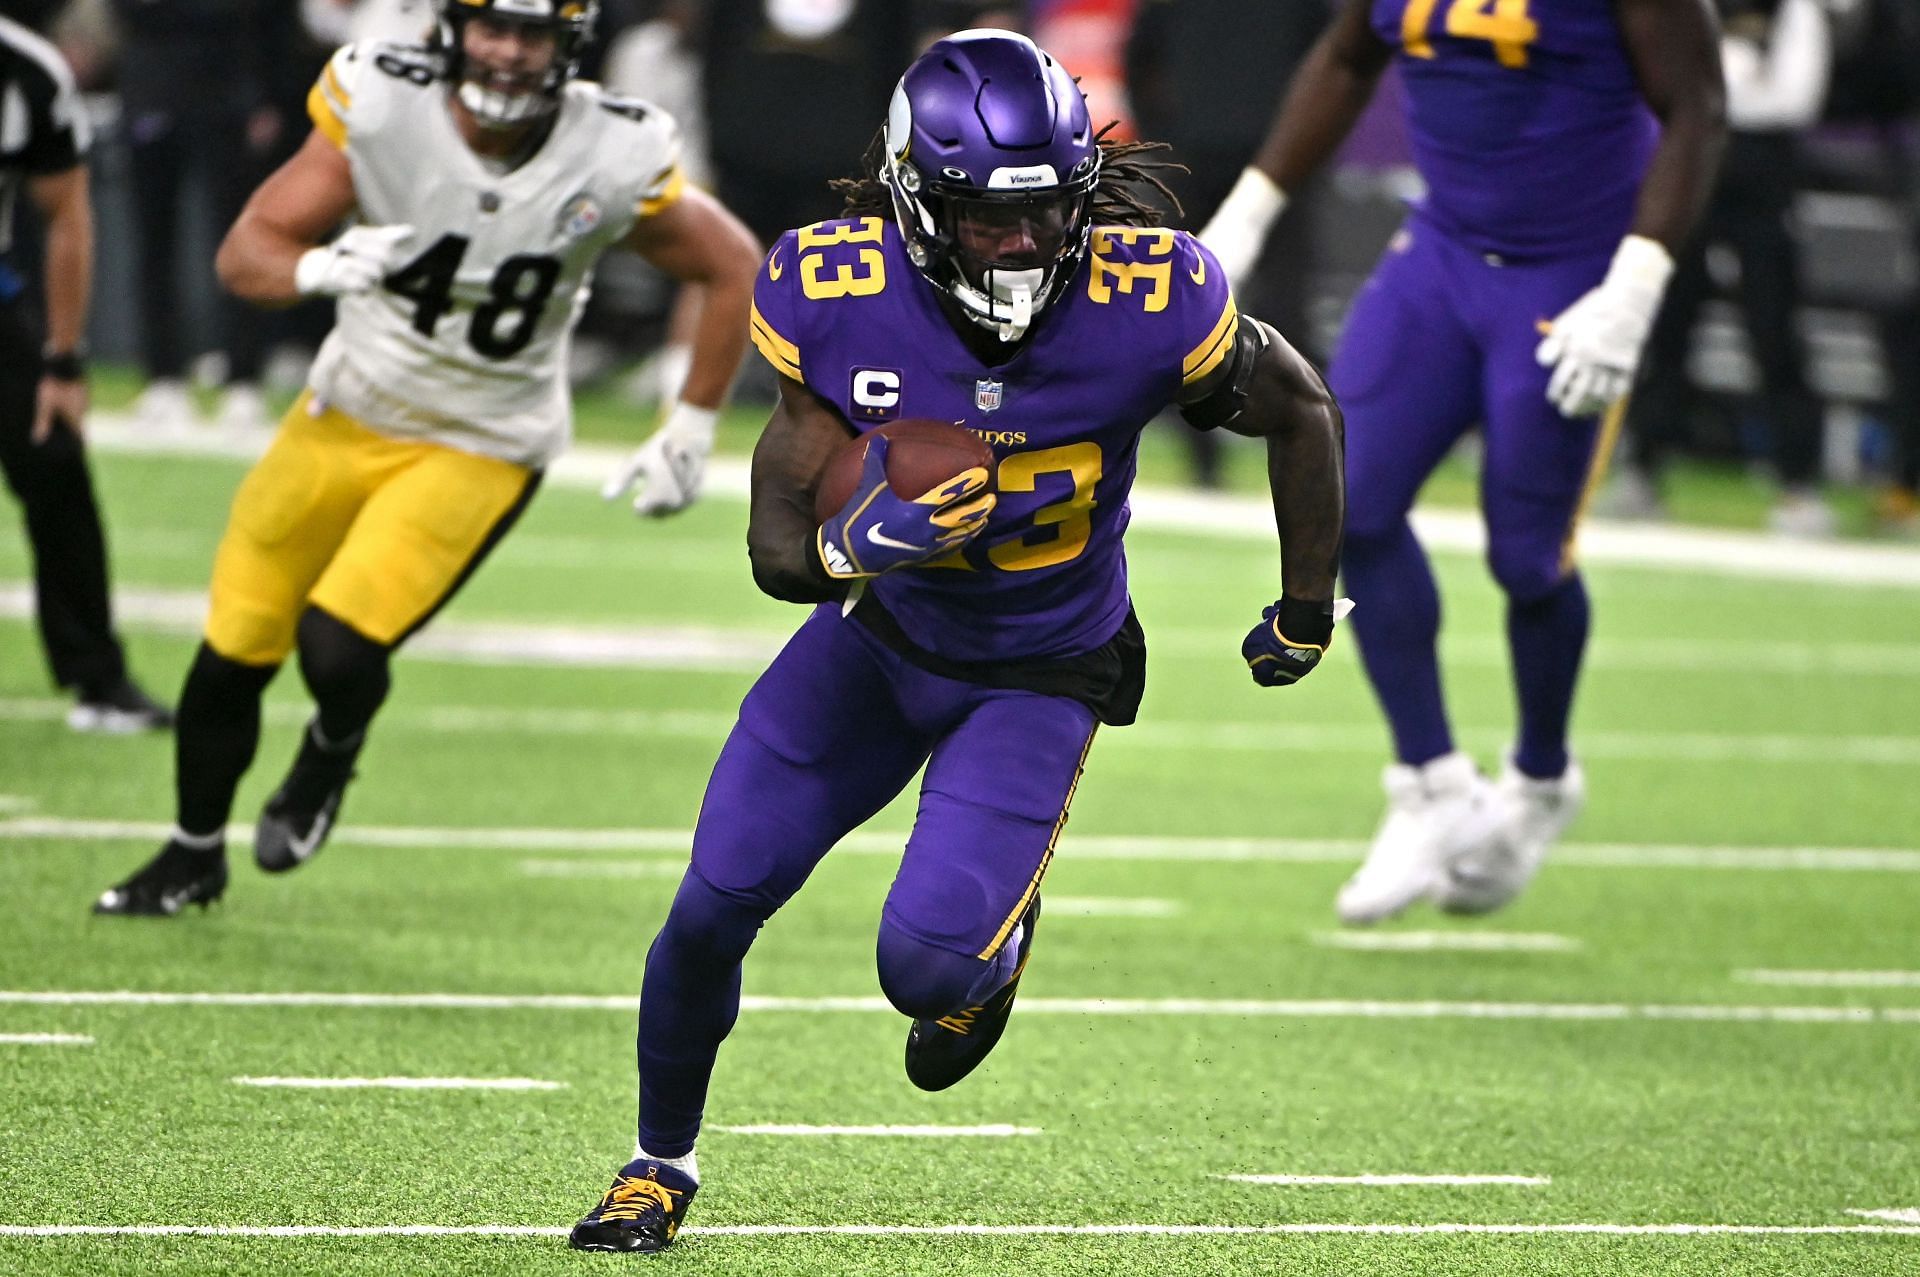 Cook wants to win a Super Bowl with the Minnesota Vikings